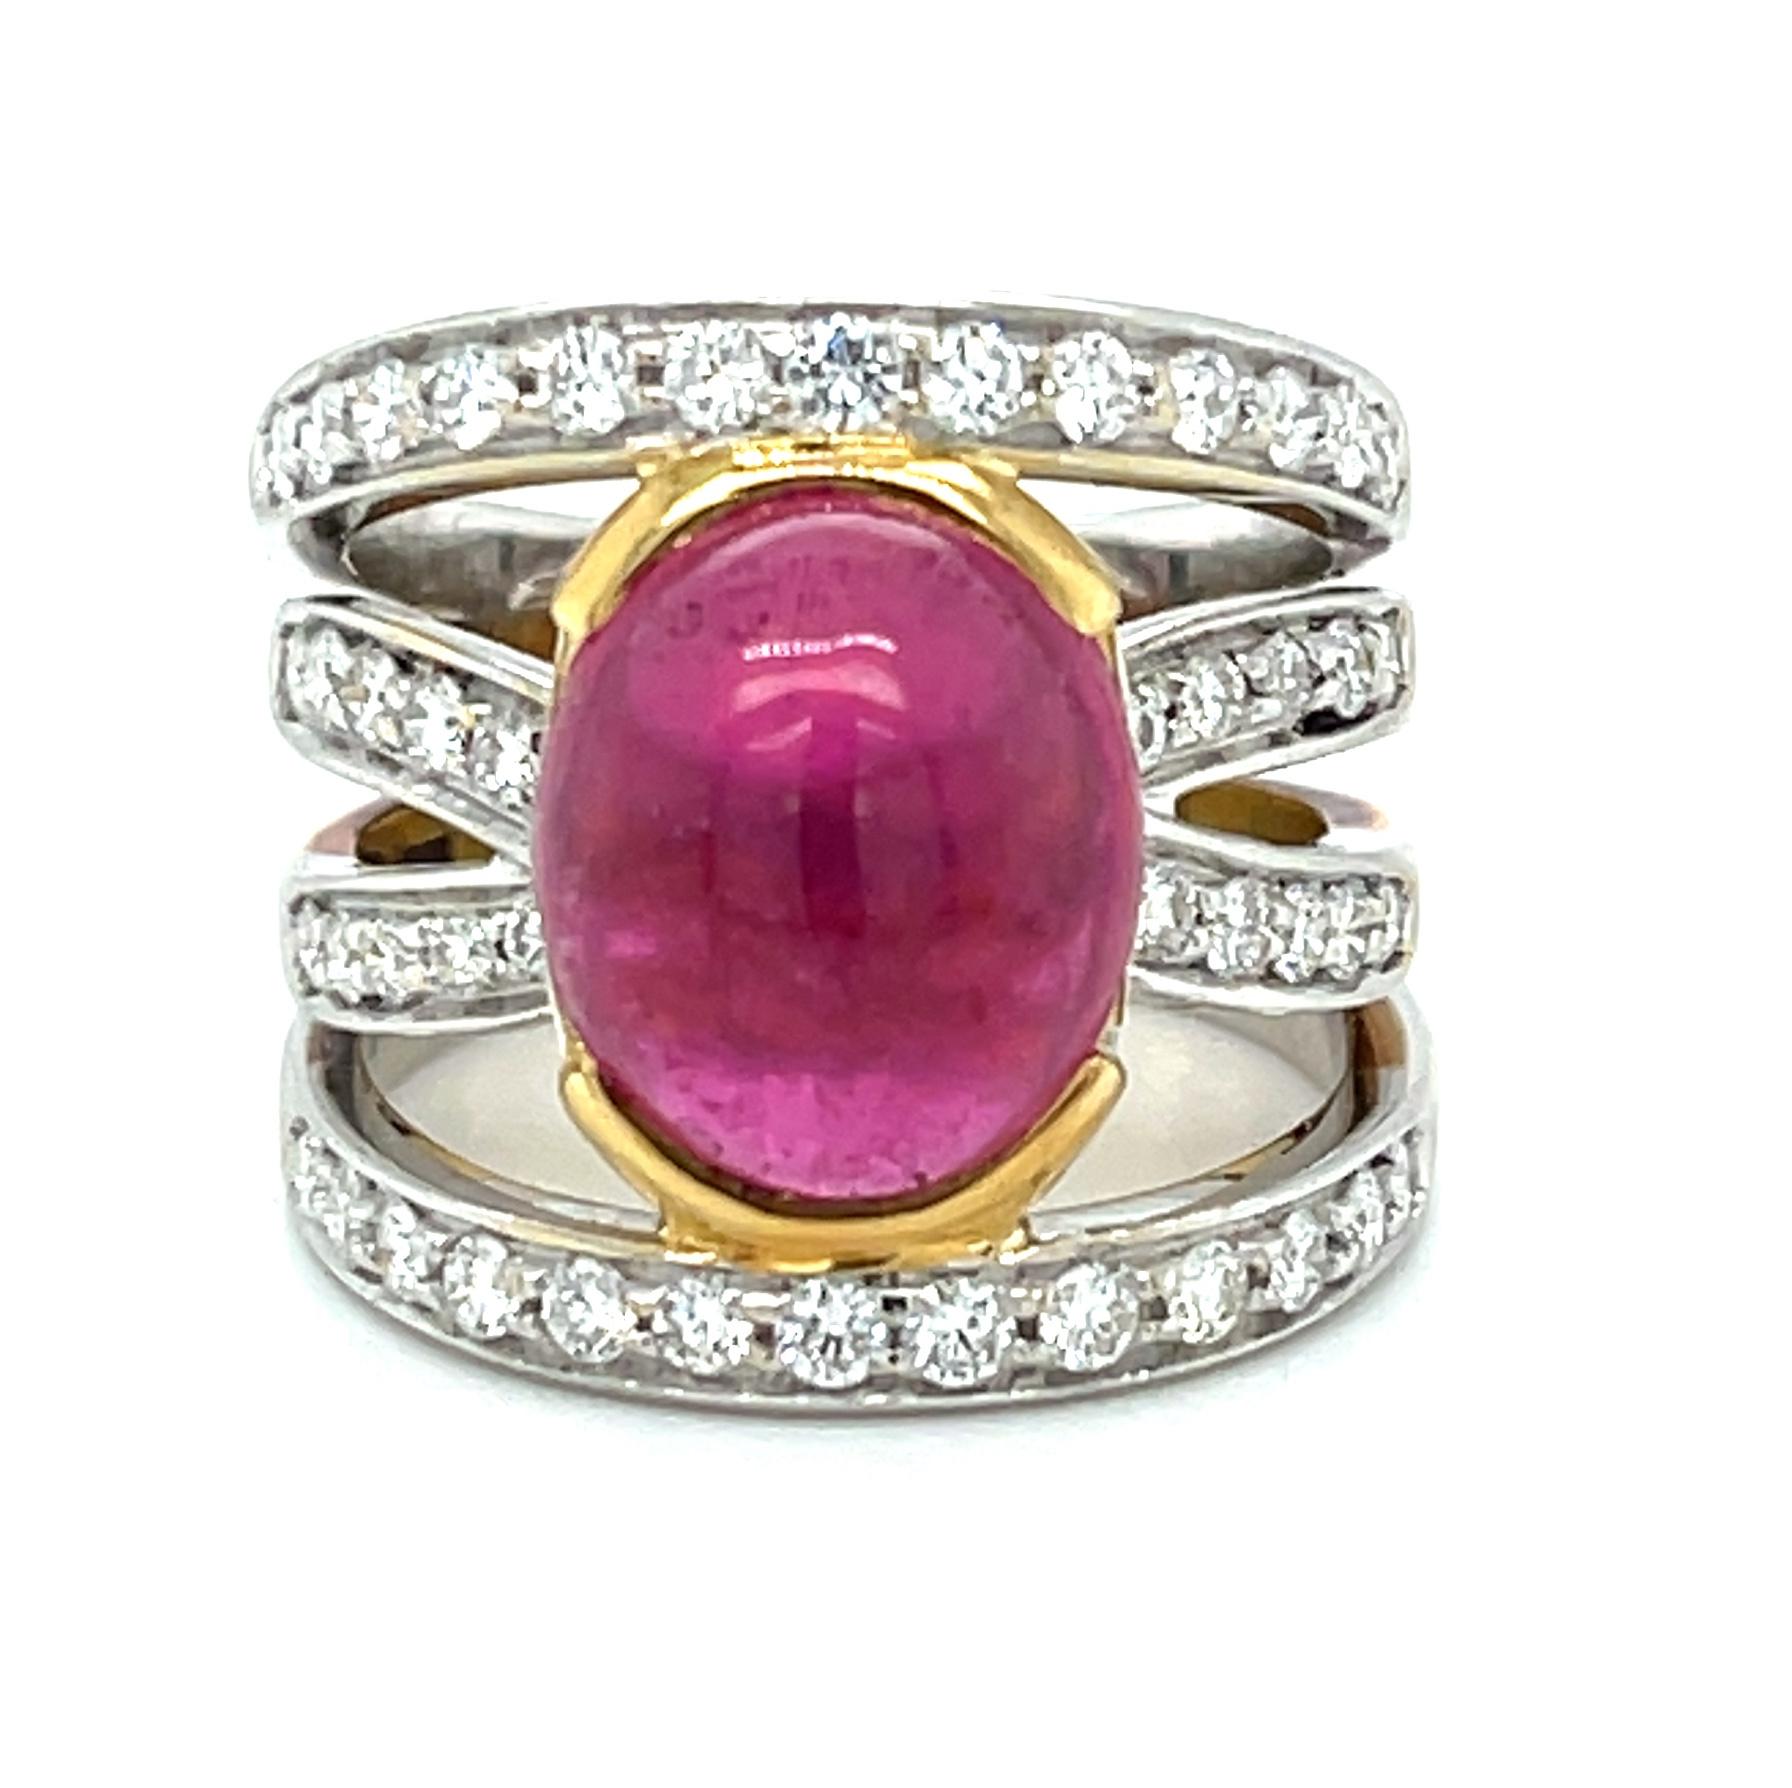 This fuchsia-pink tourmaline cabochon is nature's own confection, bezel set in a gorgeous 18k gold band ring. The diamond-studded crisscross band combines a blend of both white and yellow 18k gold, making this ring both stylish and sophisticated. A